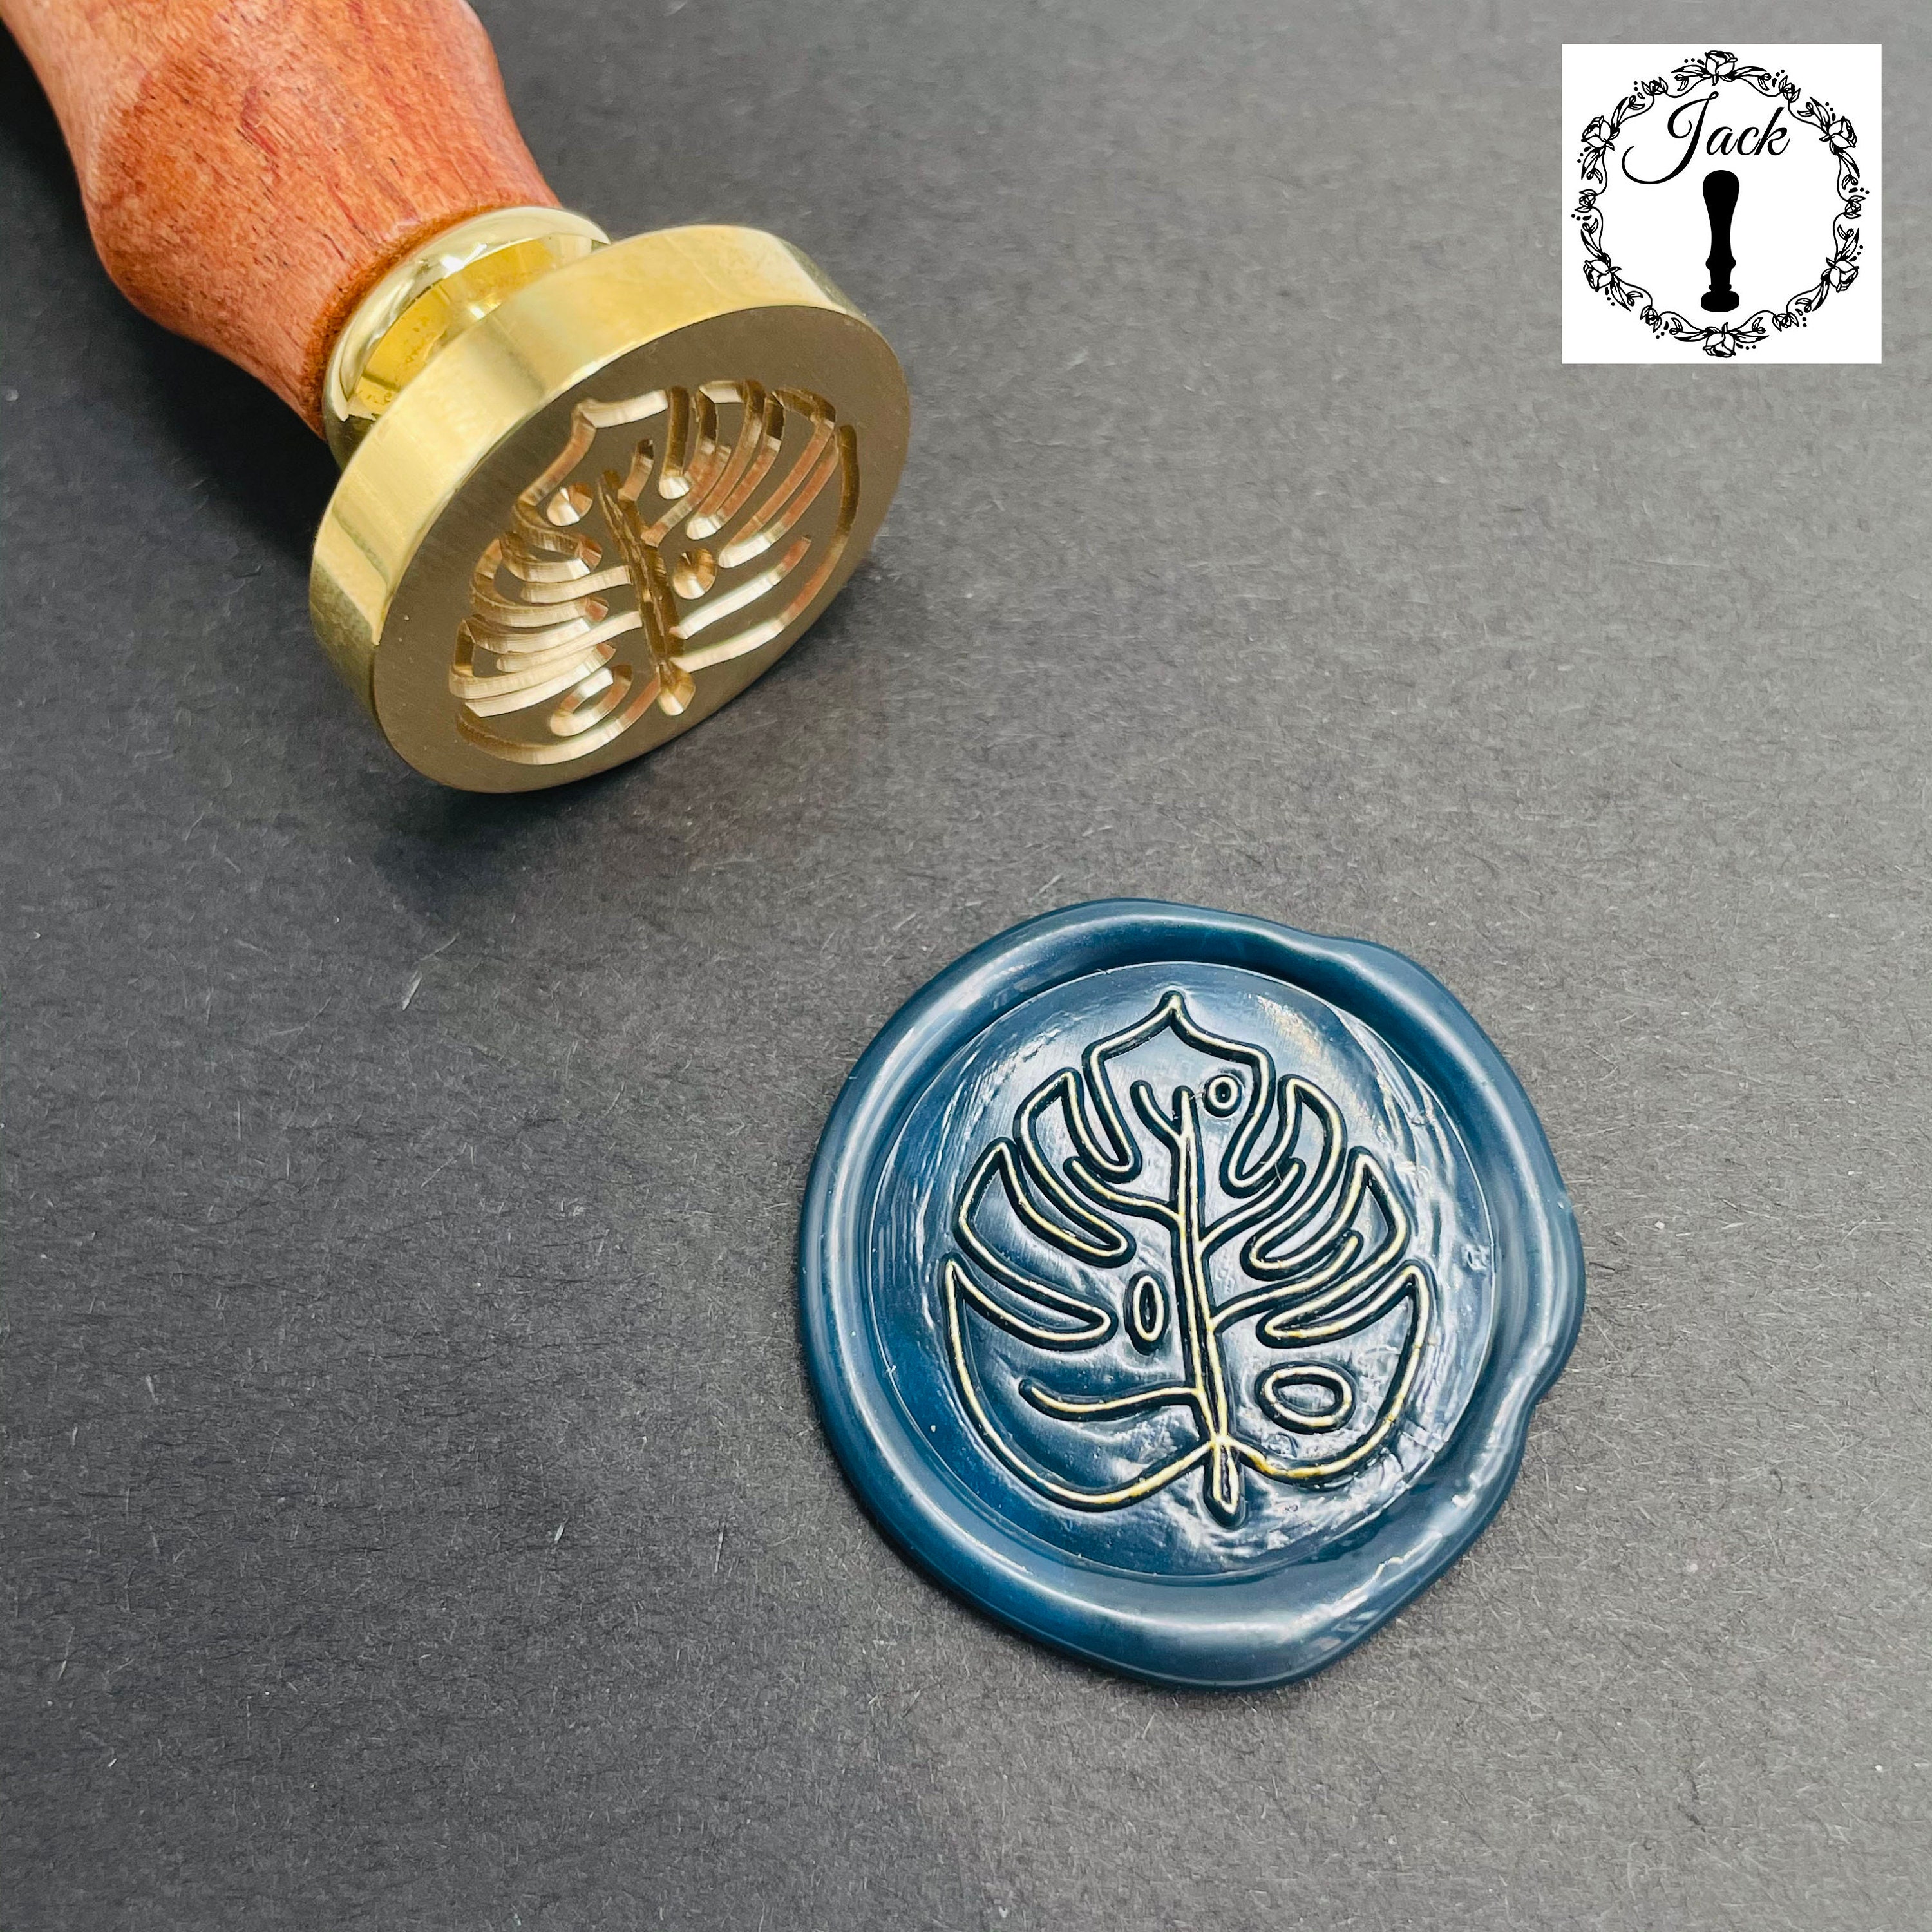 cobee Sealing Wax Stamp Kit for 1 Inch Wax Seal Stamp, 2 Pcs Round/Flower  Shaped Wax Seal Molds with Silicone Waxing Mat Wax Seal Kit for Gift  Wrapping Decoration Envelopes Cards Wedding